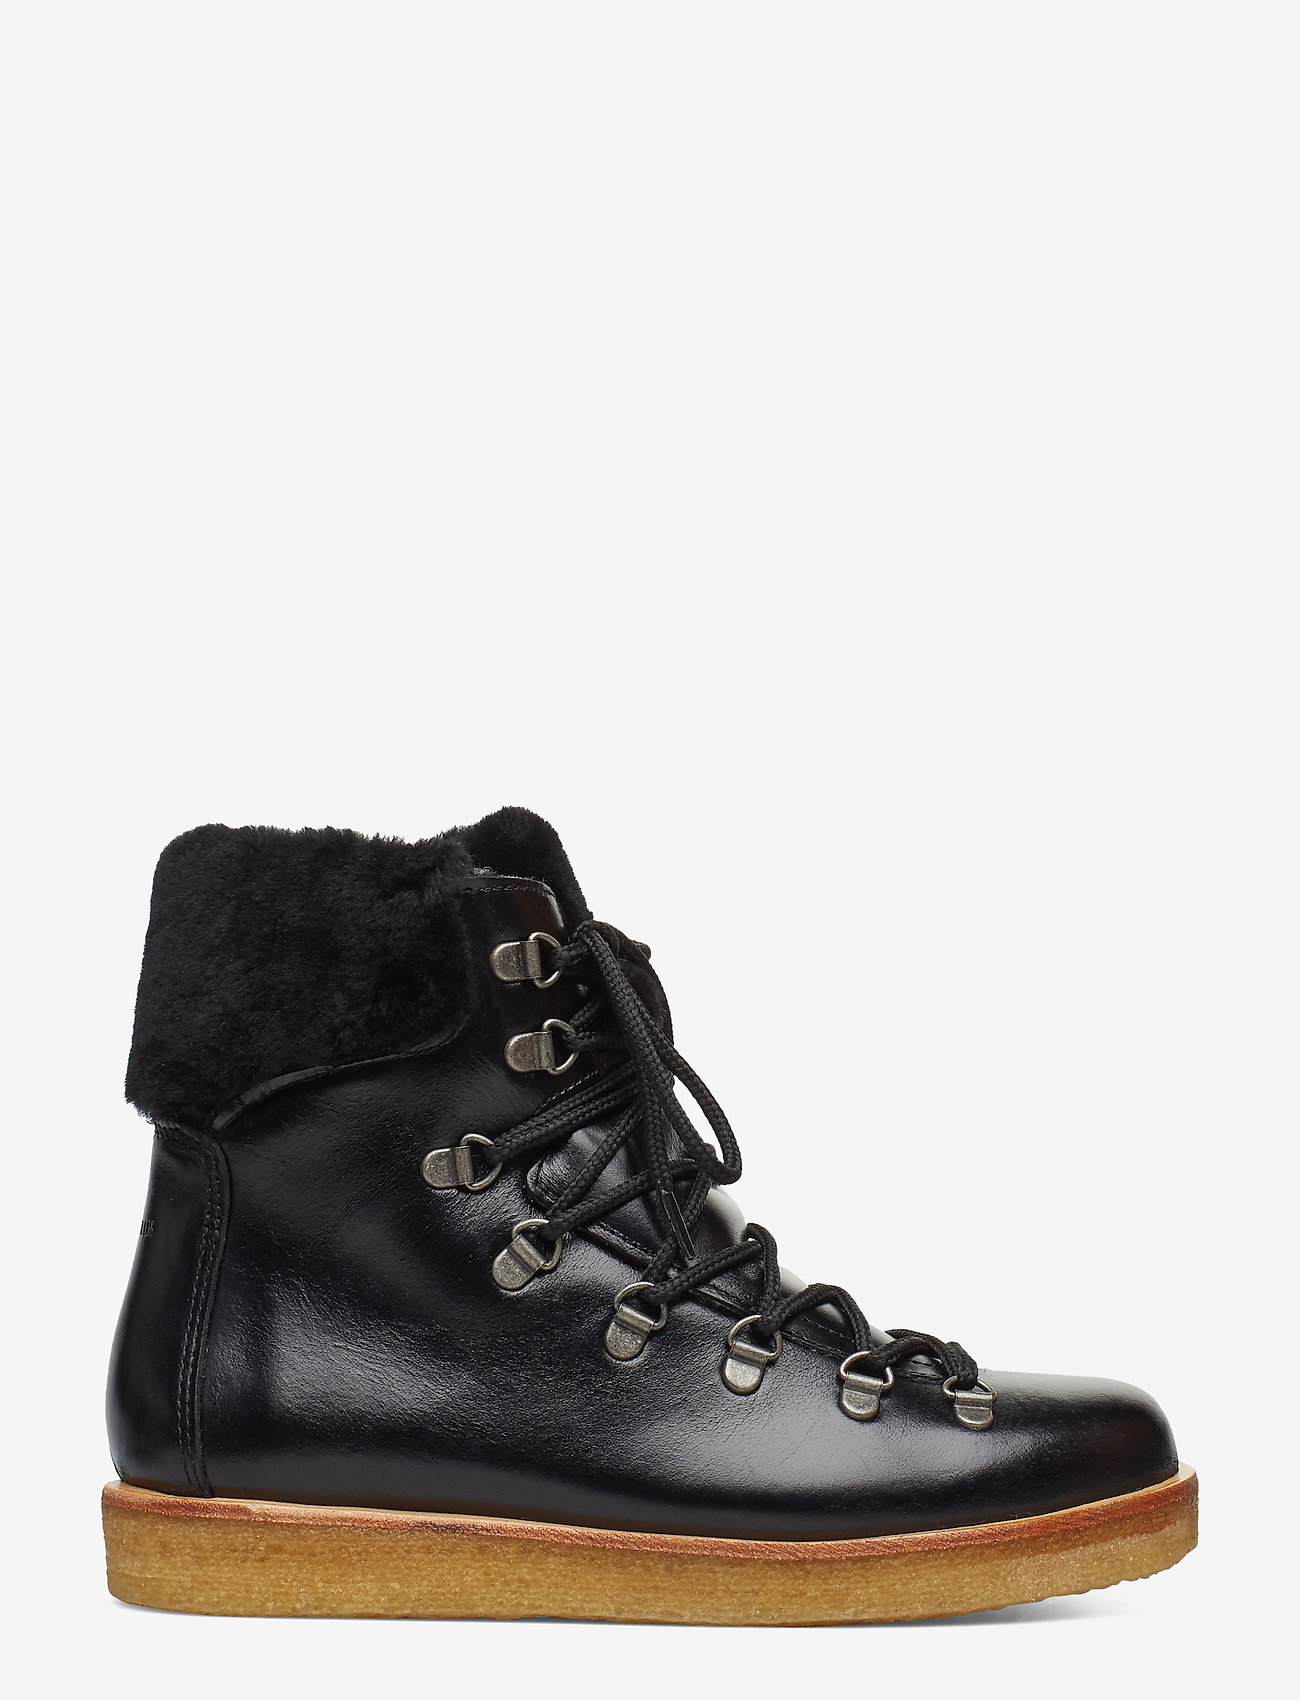 ANGULUS - Boots - flat - with laces - bottines plates - 1835/2014 black/black lambswoo - 1